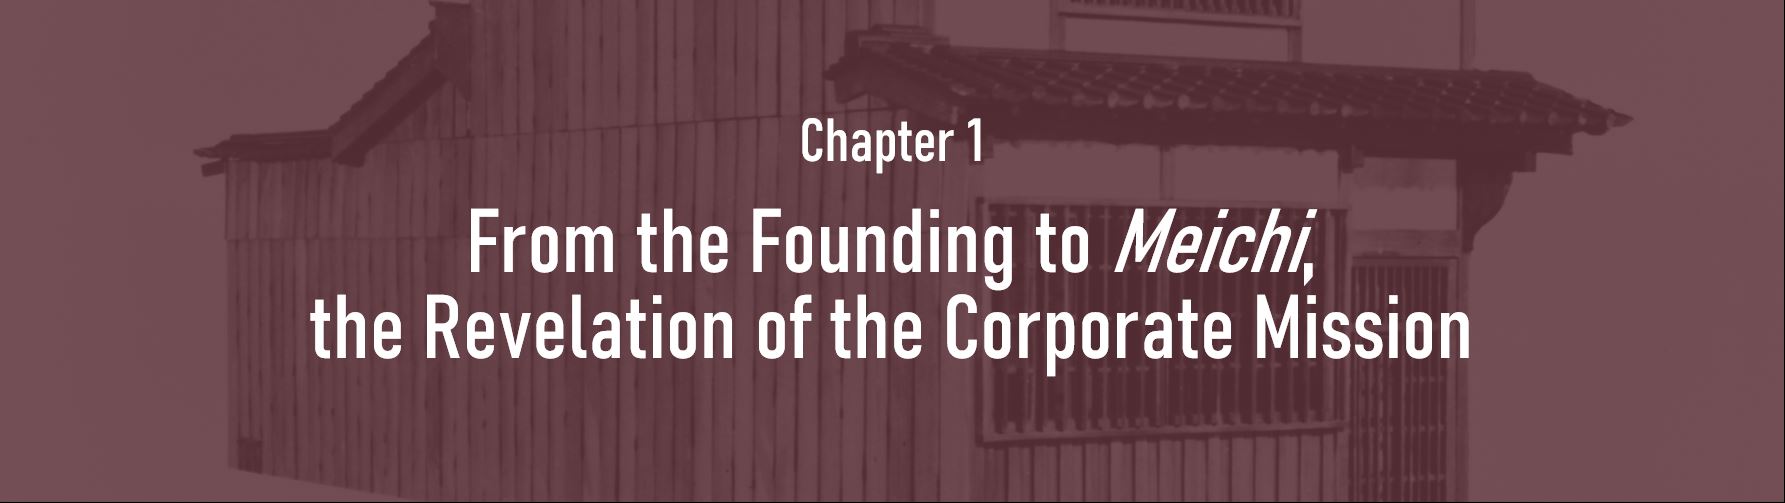 Chapter 1. From the Founding to Meichi, the Revelation of the Corporate Mission